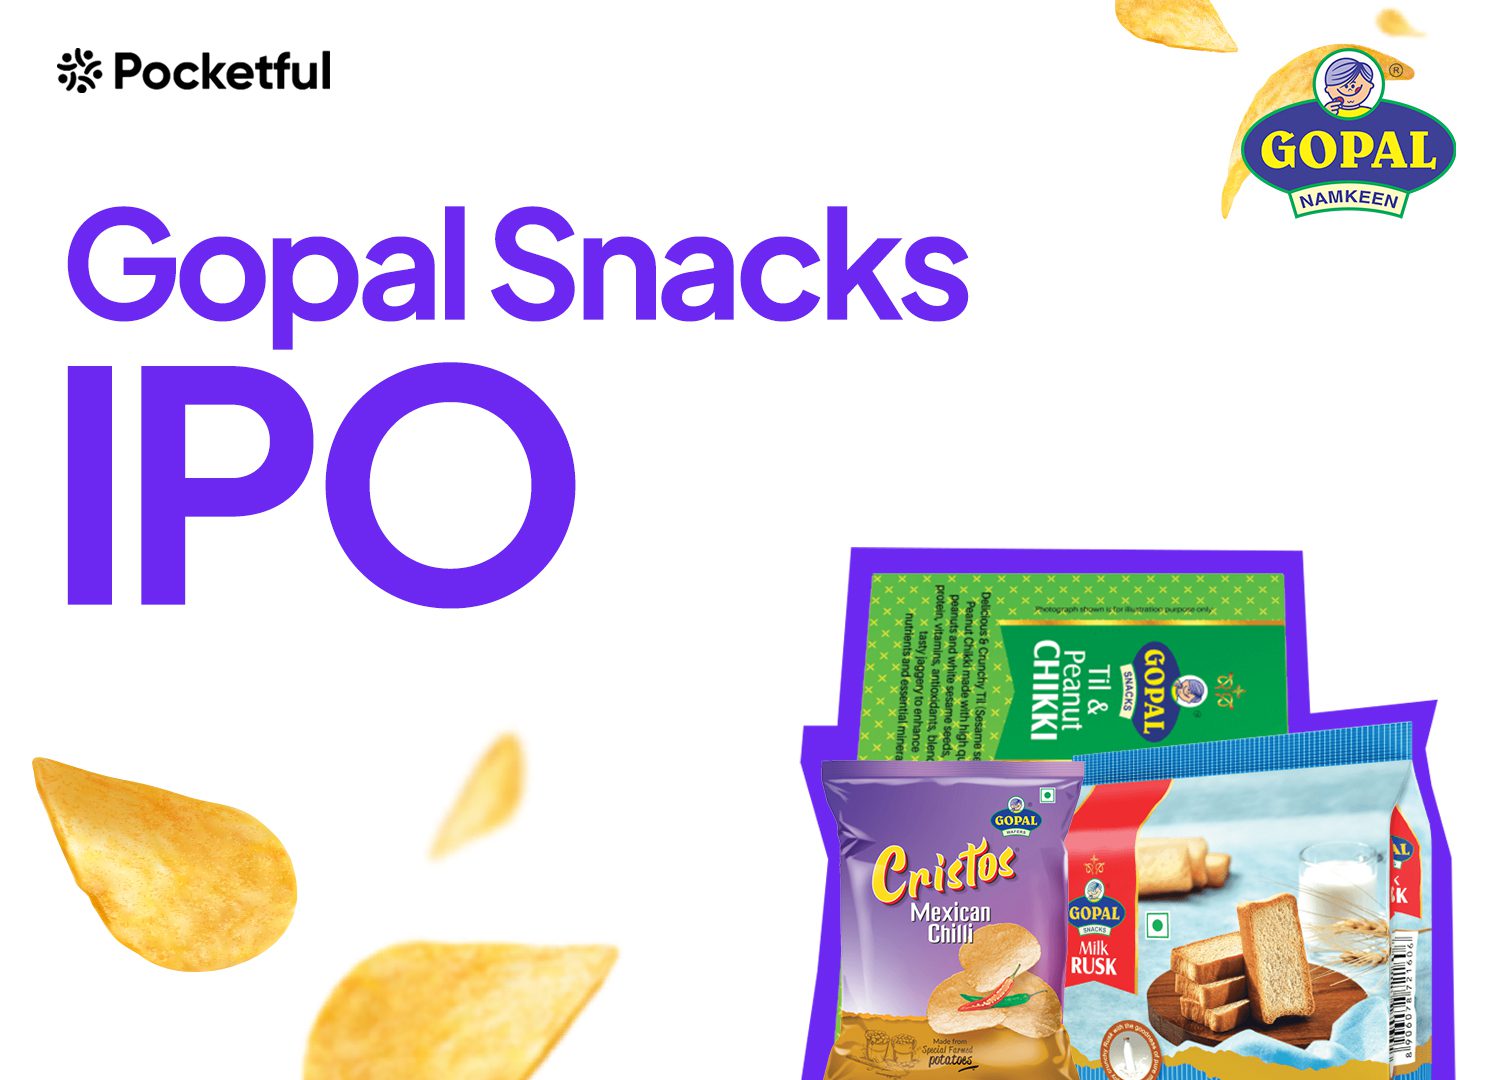 Gopal Snacks IPO: Segments, Financials, Key Details, Strengths, and Weaknesses